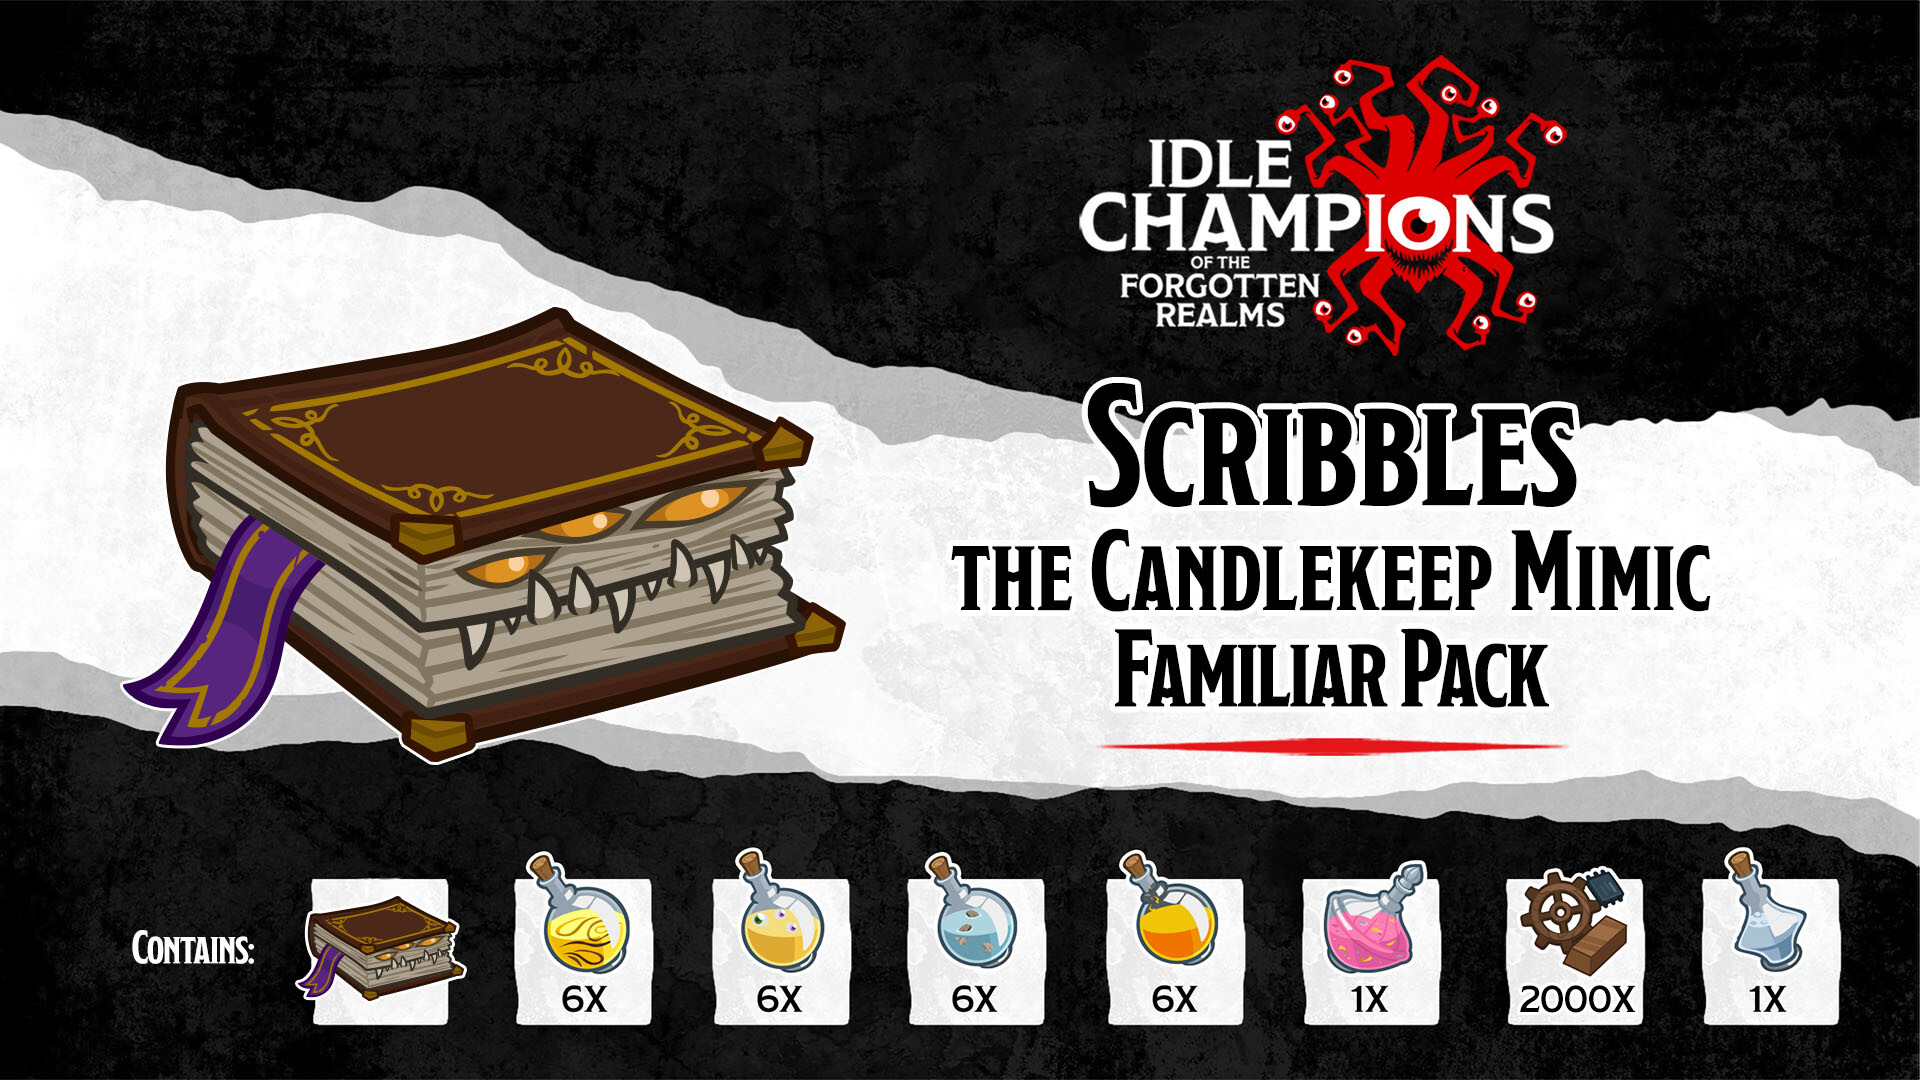 Idle Champions - Scribbles the Candlekeep Mimic Familiar Pack Featured Screenshot #1